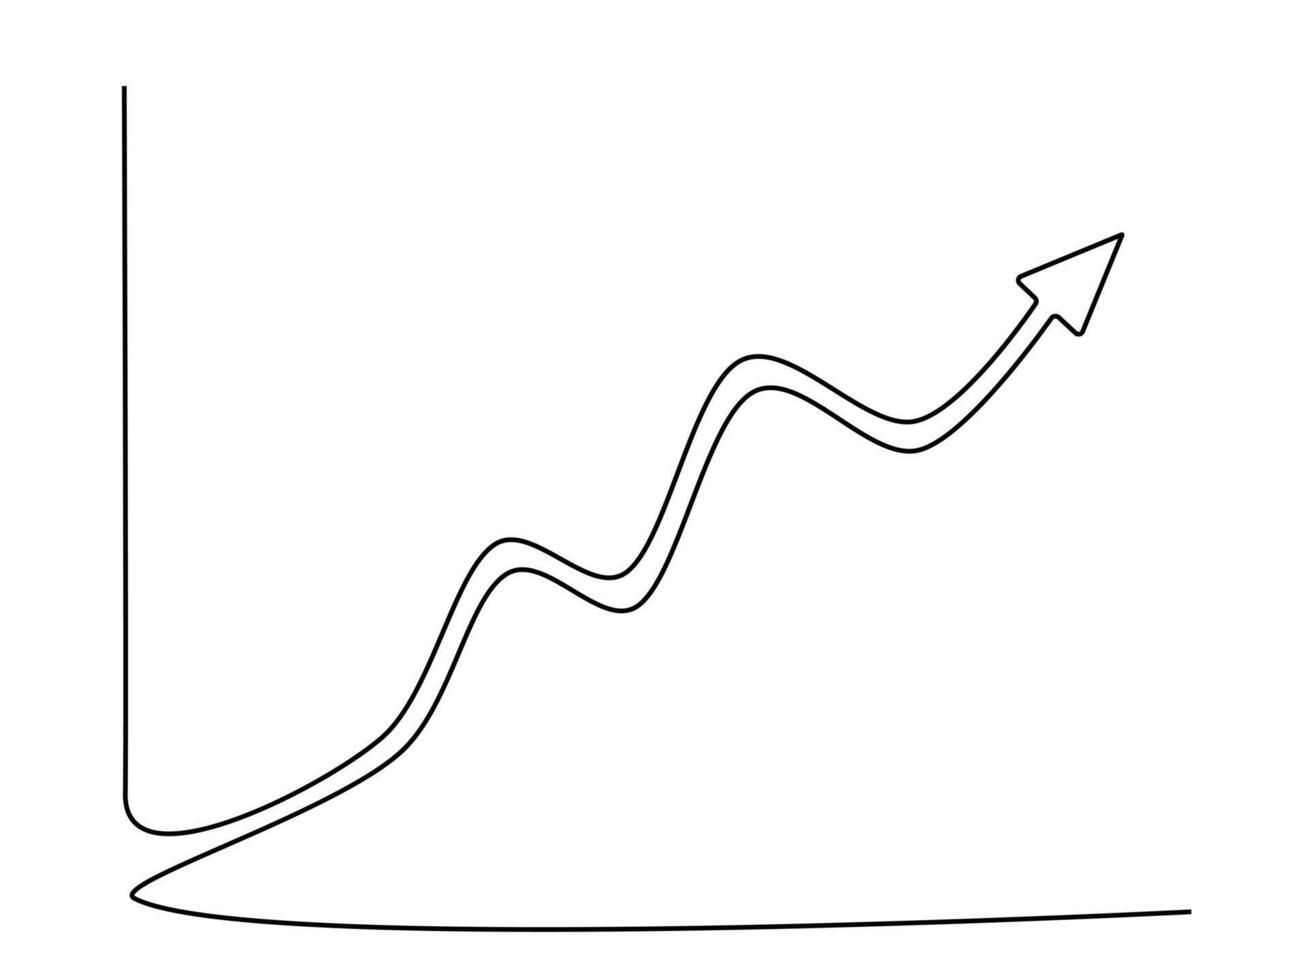 Draw a continuous line of the growth graph vector